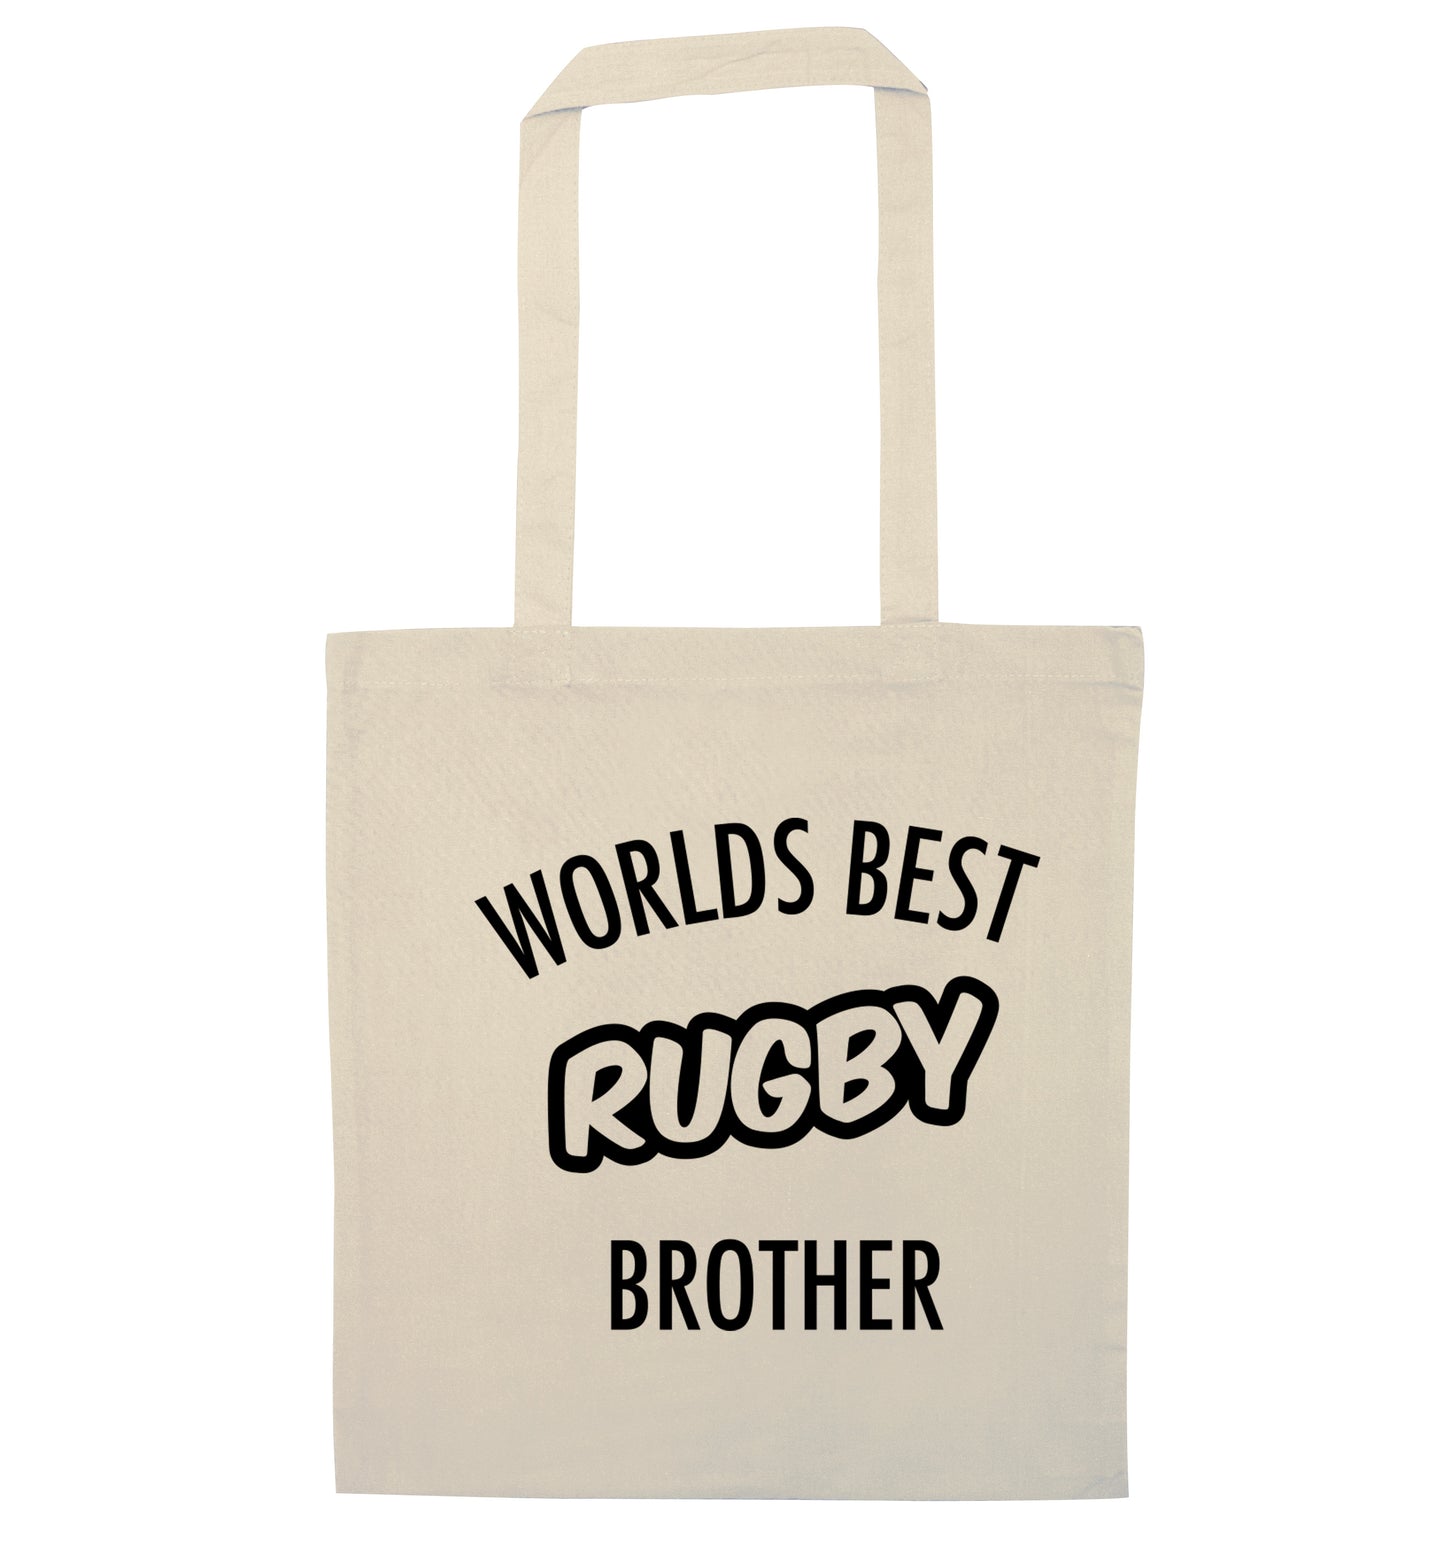 Worlds best rugby brother natural tote bag